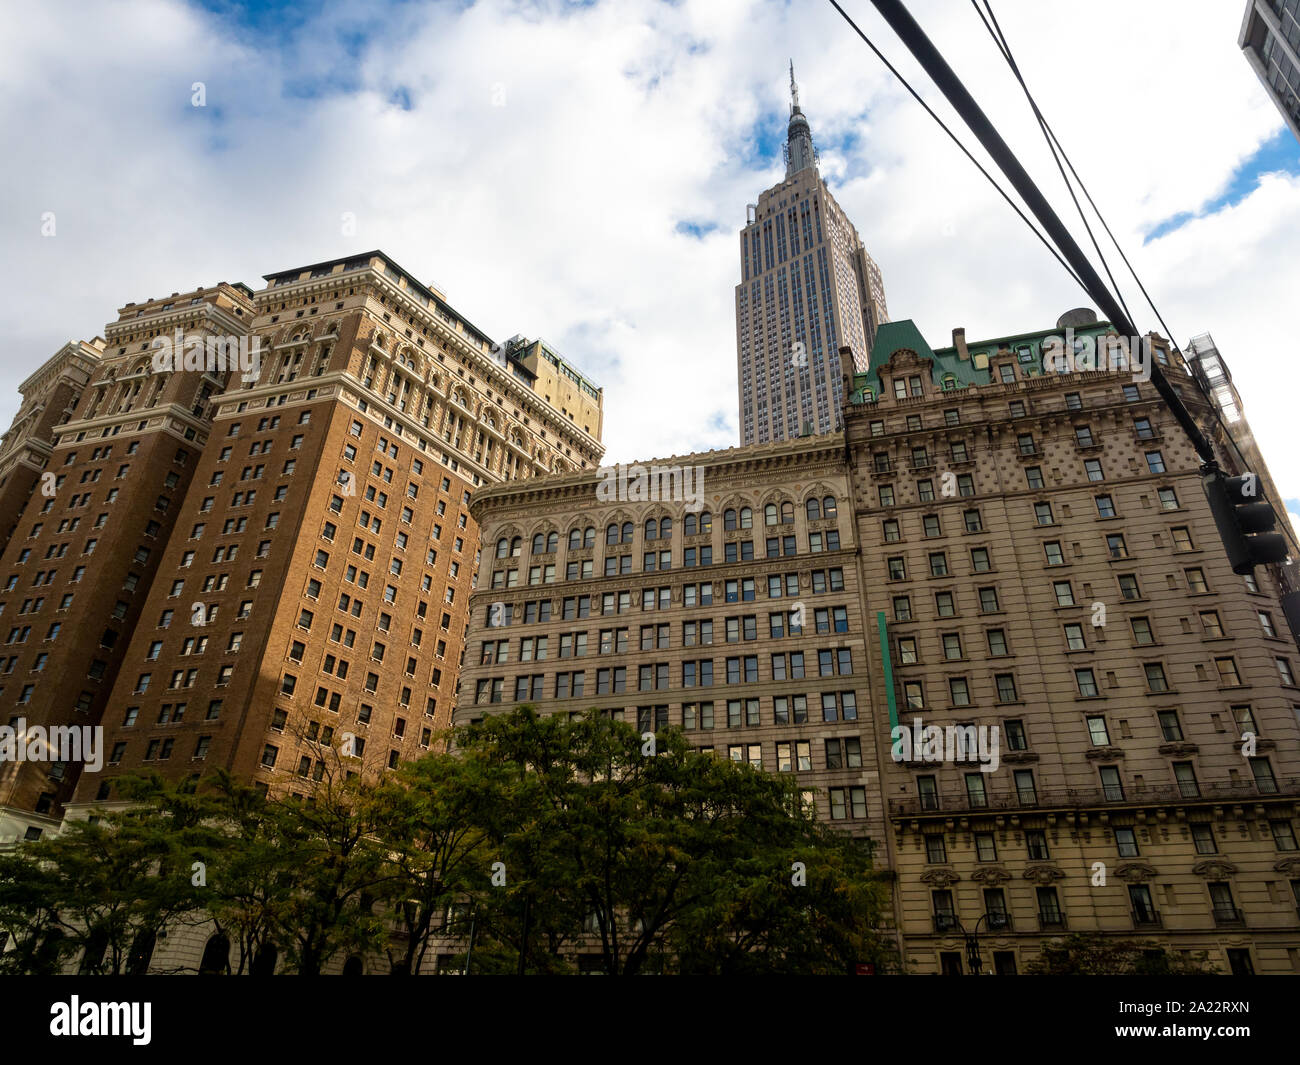 Most famous New York skyscraper poking out behind classic buildings in Midtown Manhattan Stock Photo